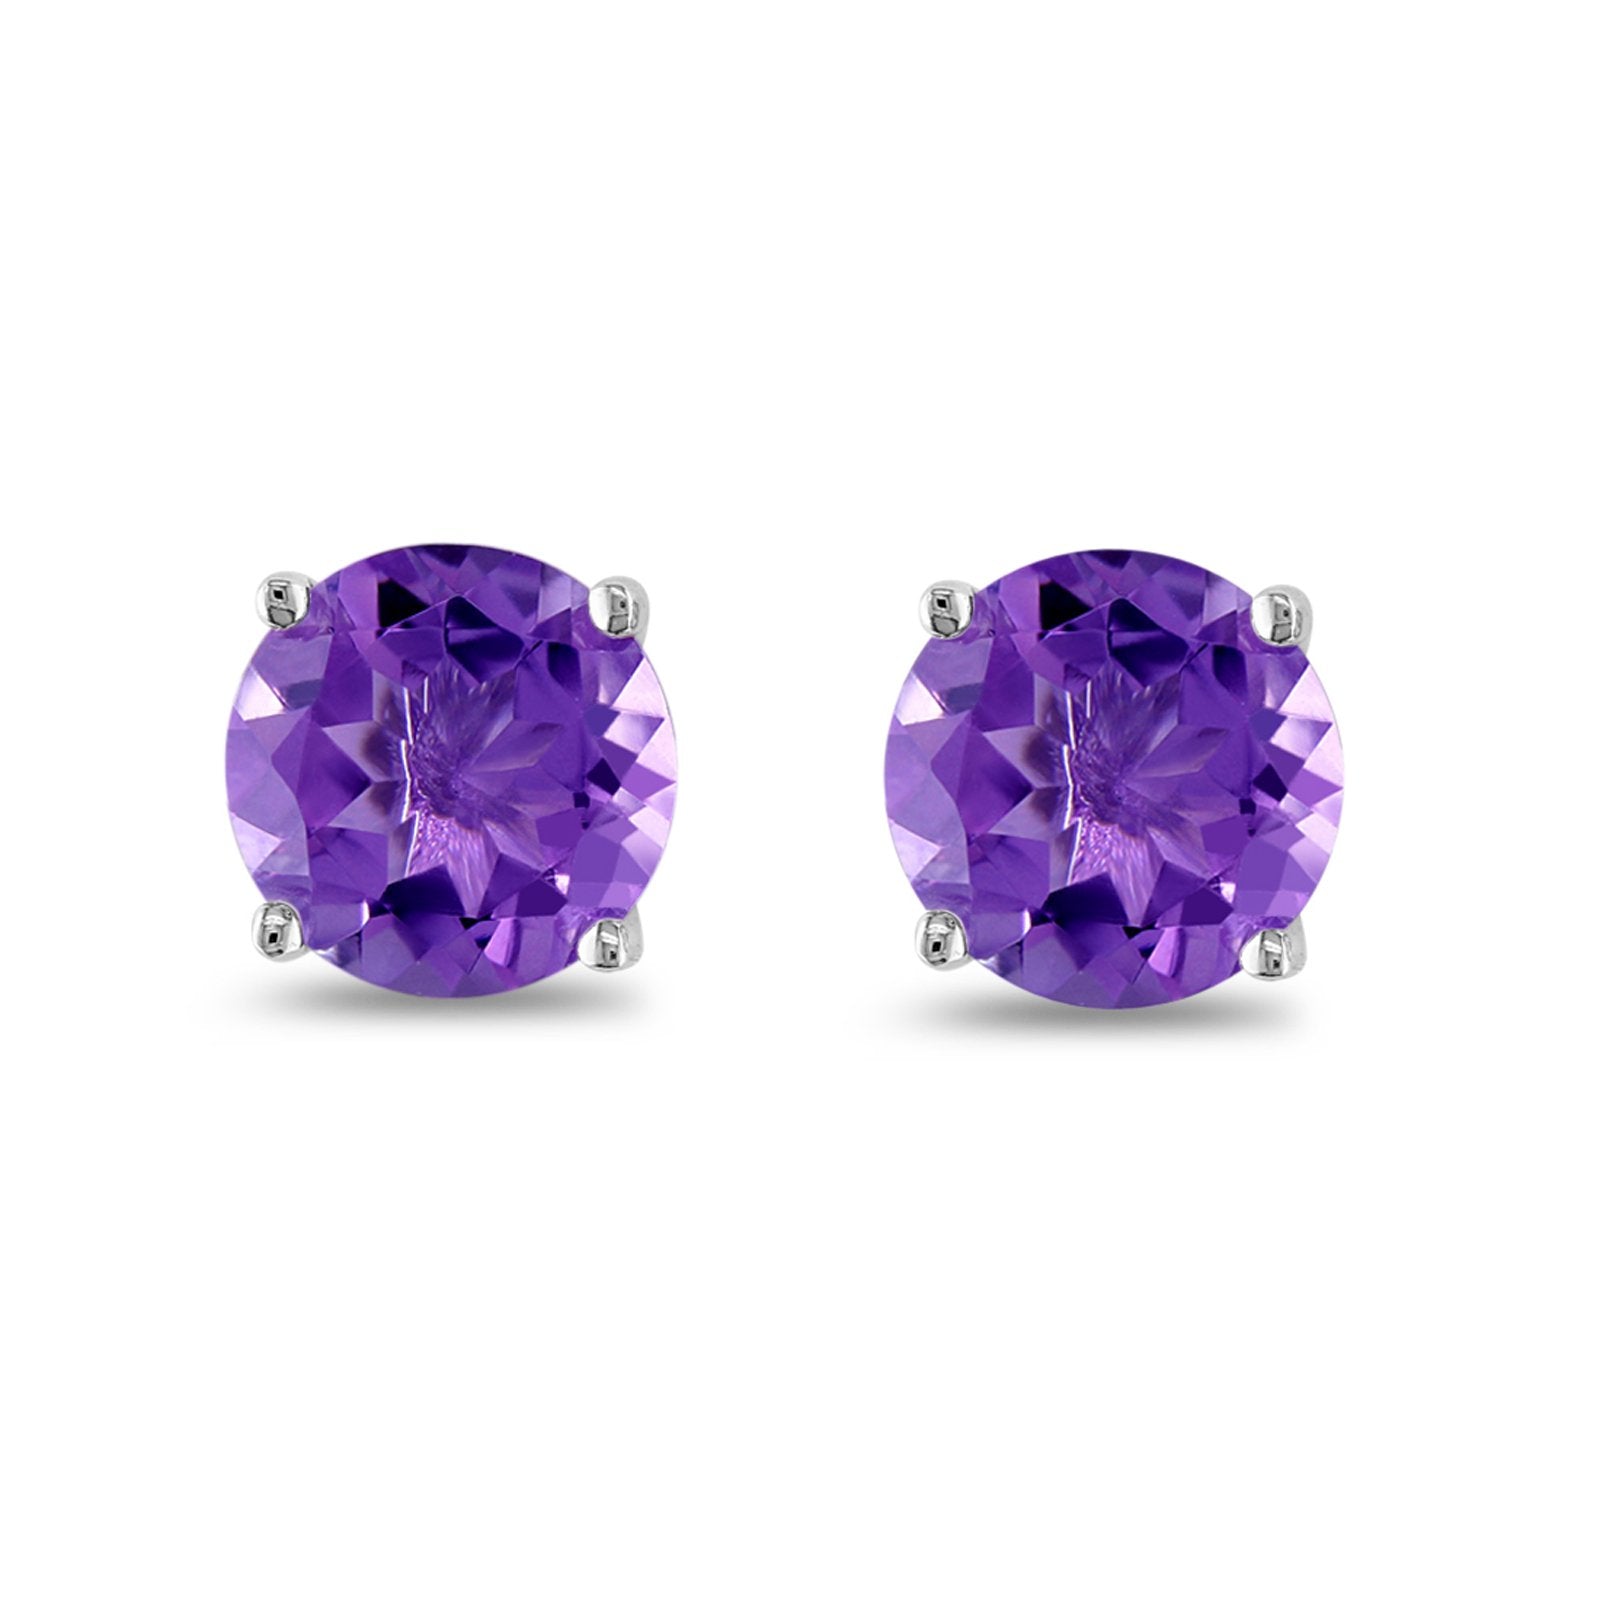 Butterfly Prong Round Casting Simulated Amethyst CZ Stud Earrings 925 Sterling Silver